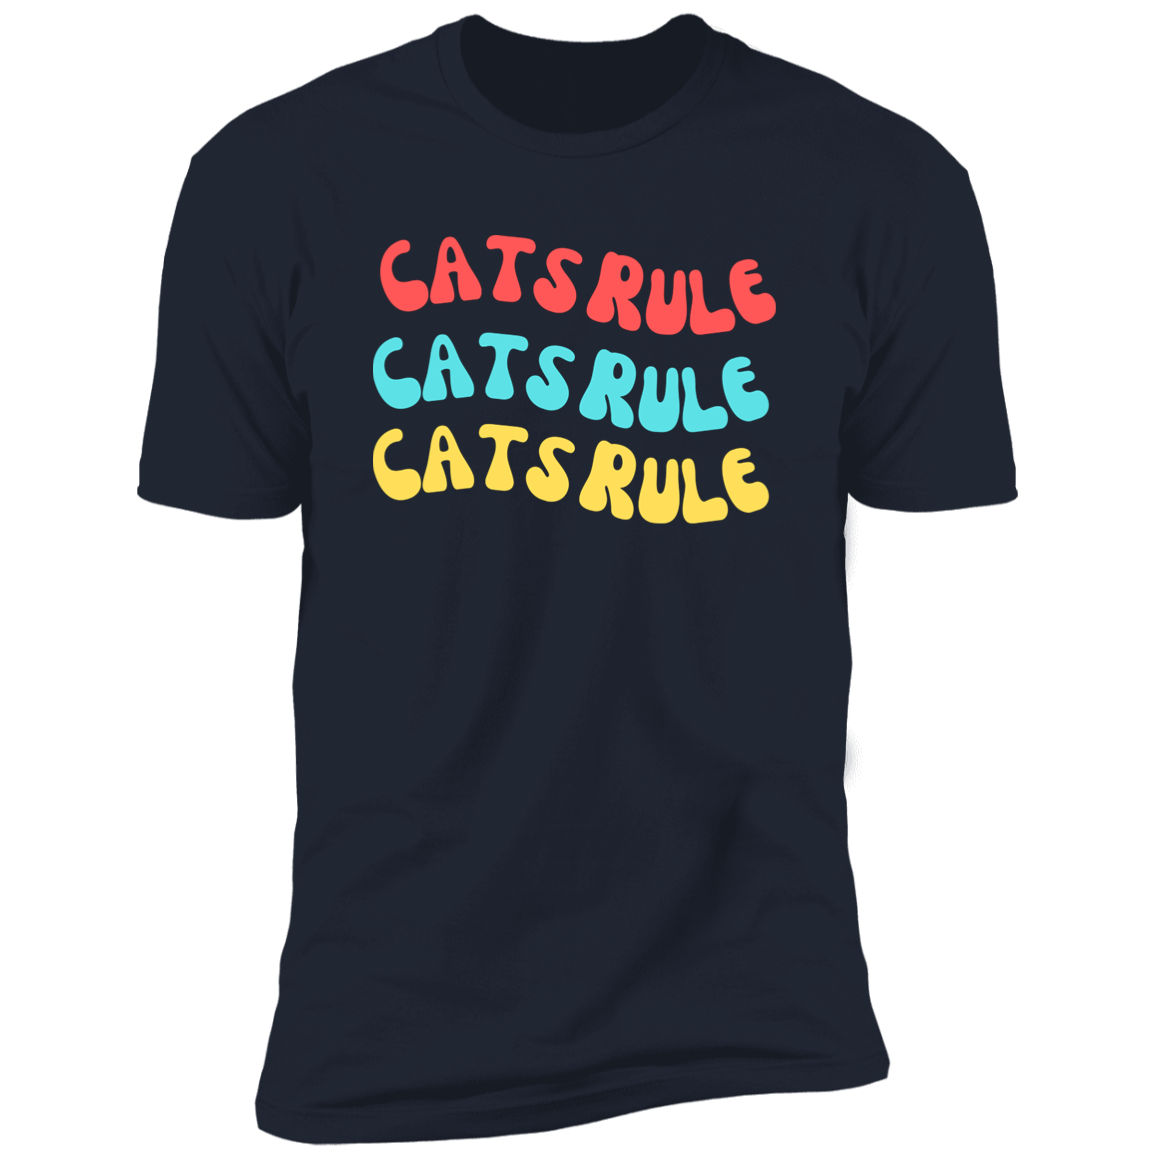 Cats Rule T-shirt, Cat Shirt for humans, in navy blue